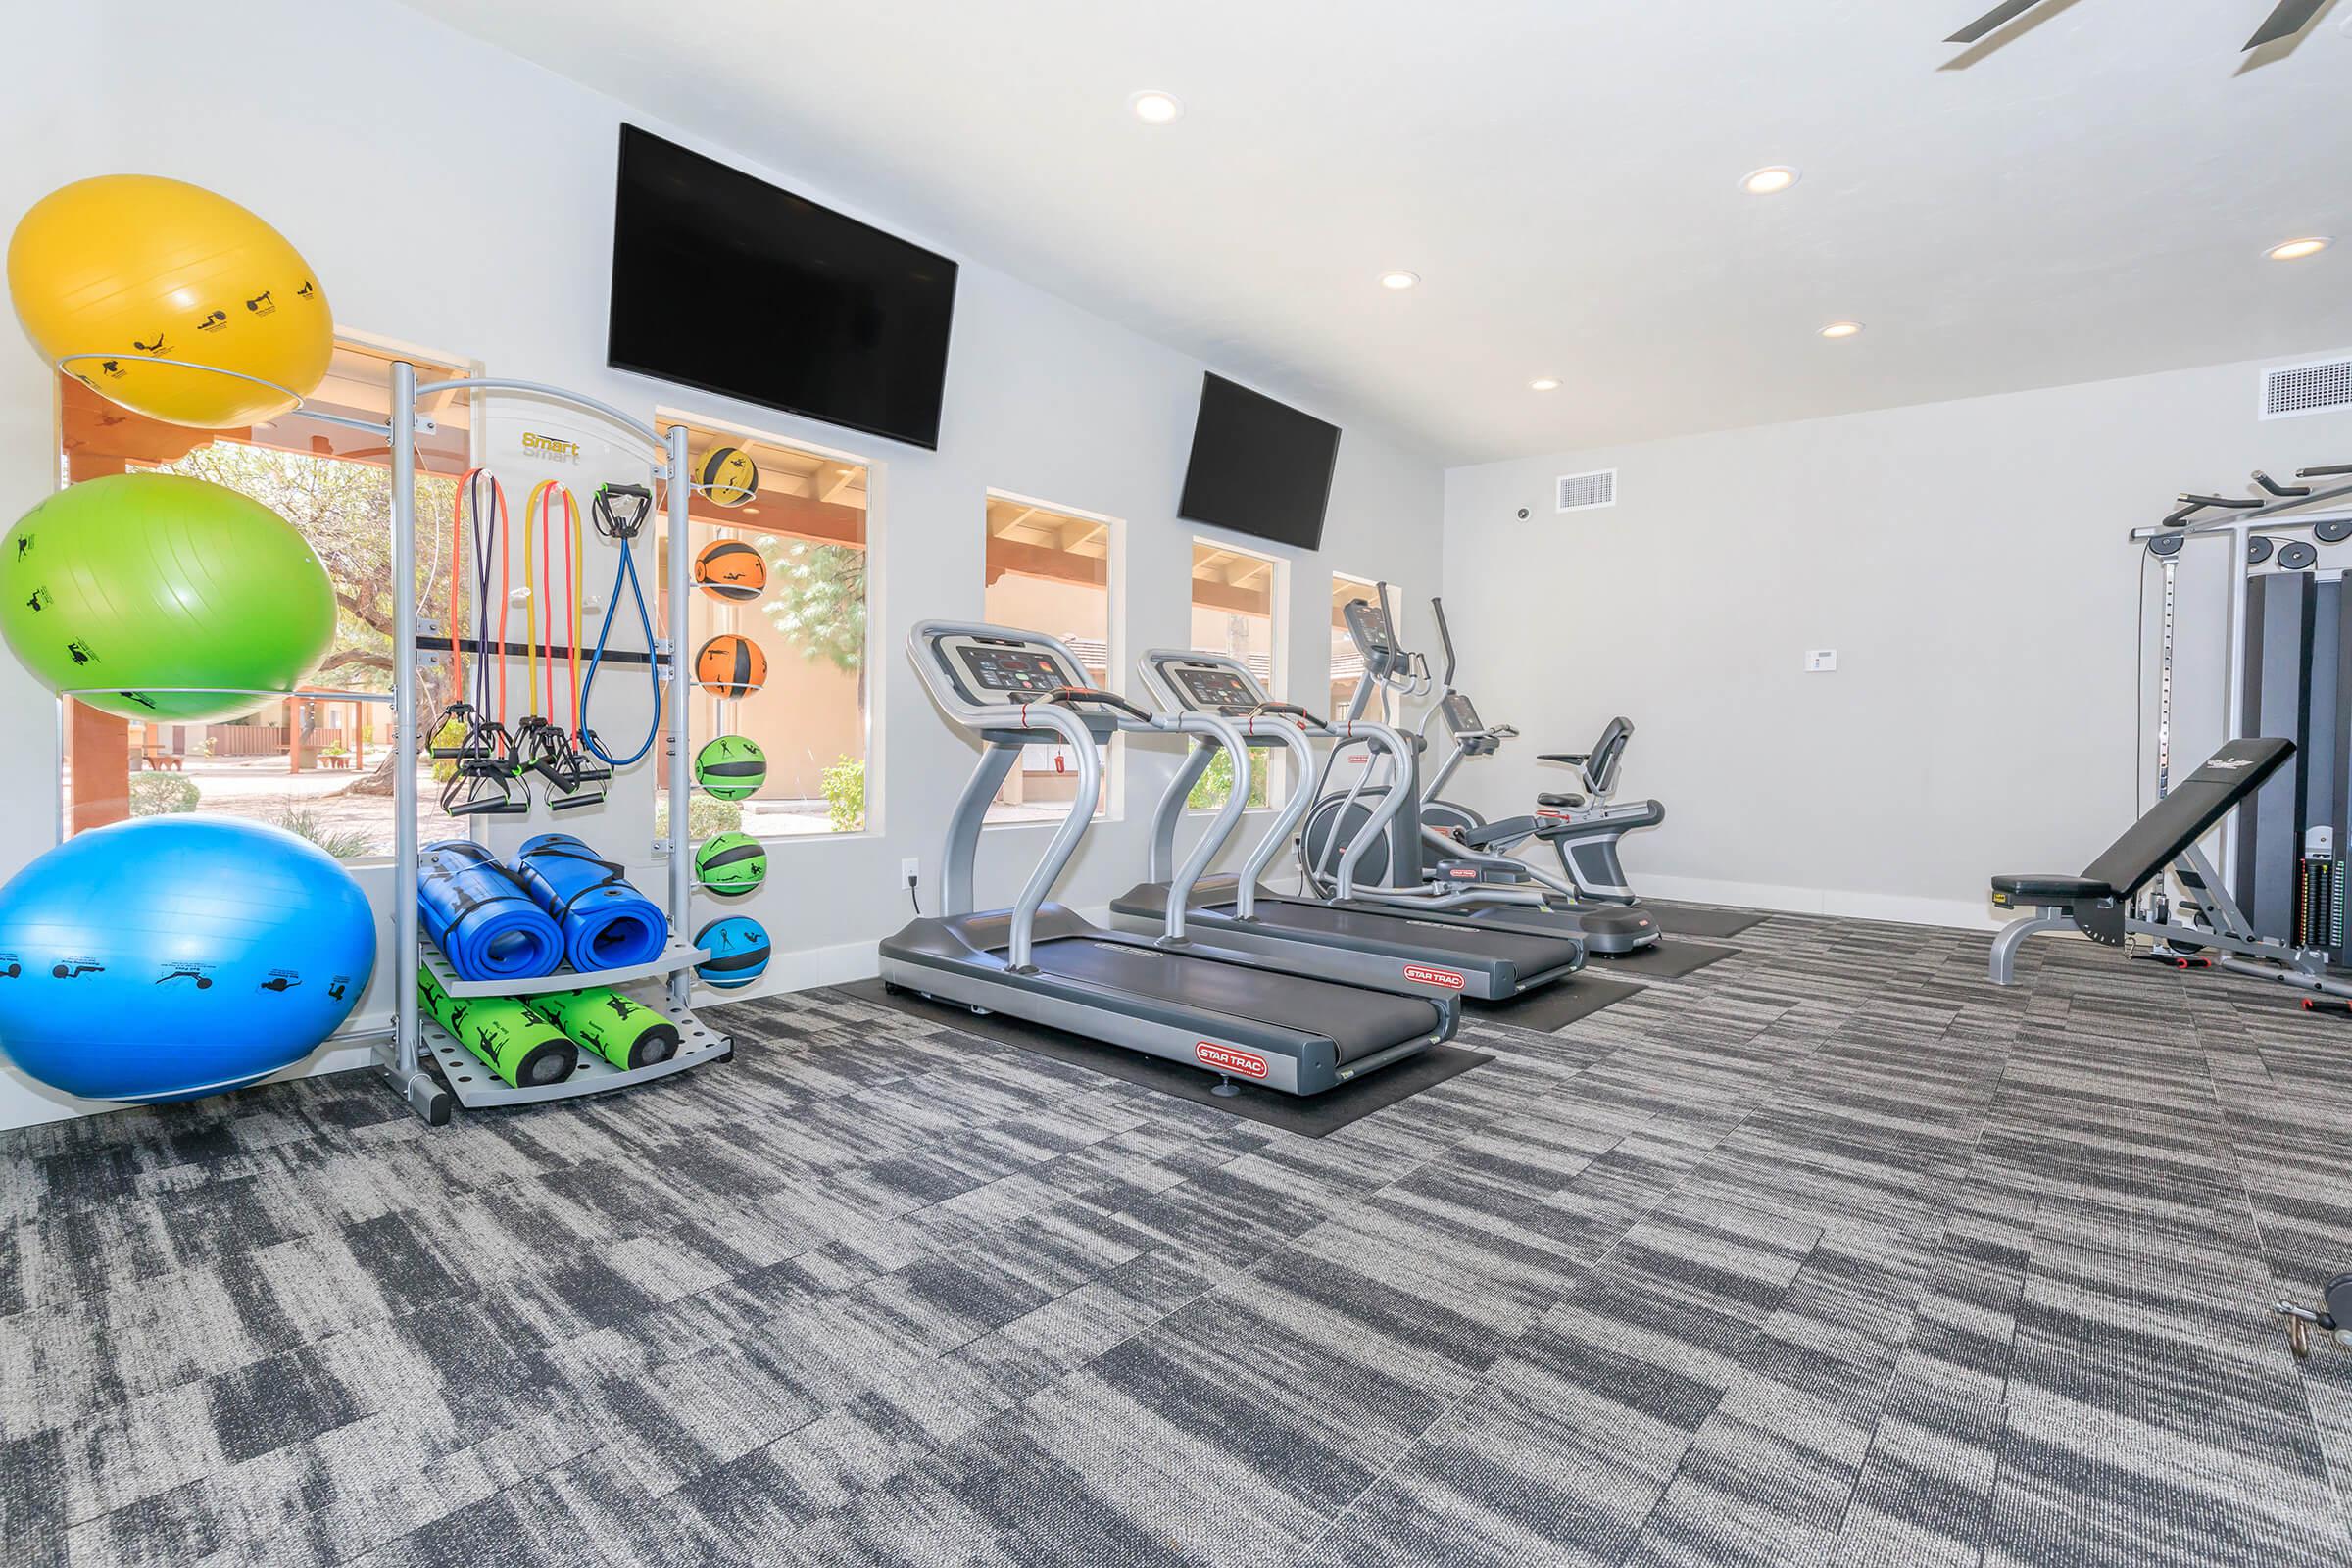 A STATE-OF-THE-ART FITNESS CENTER